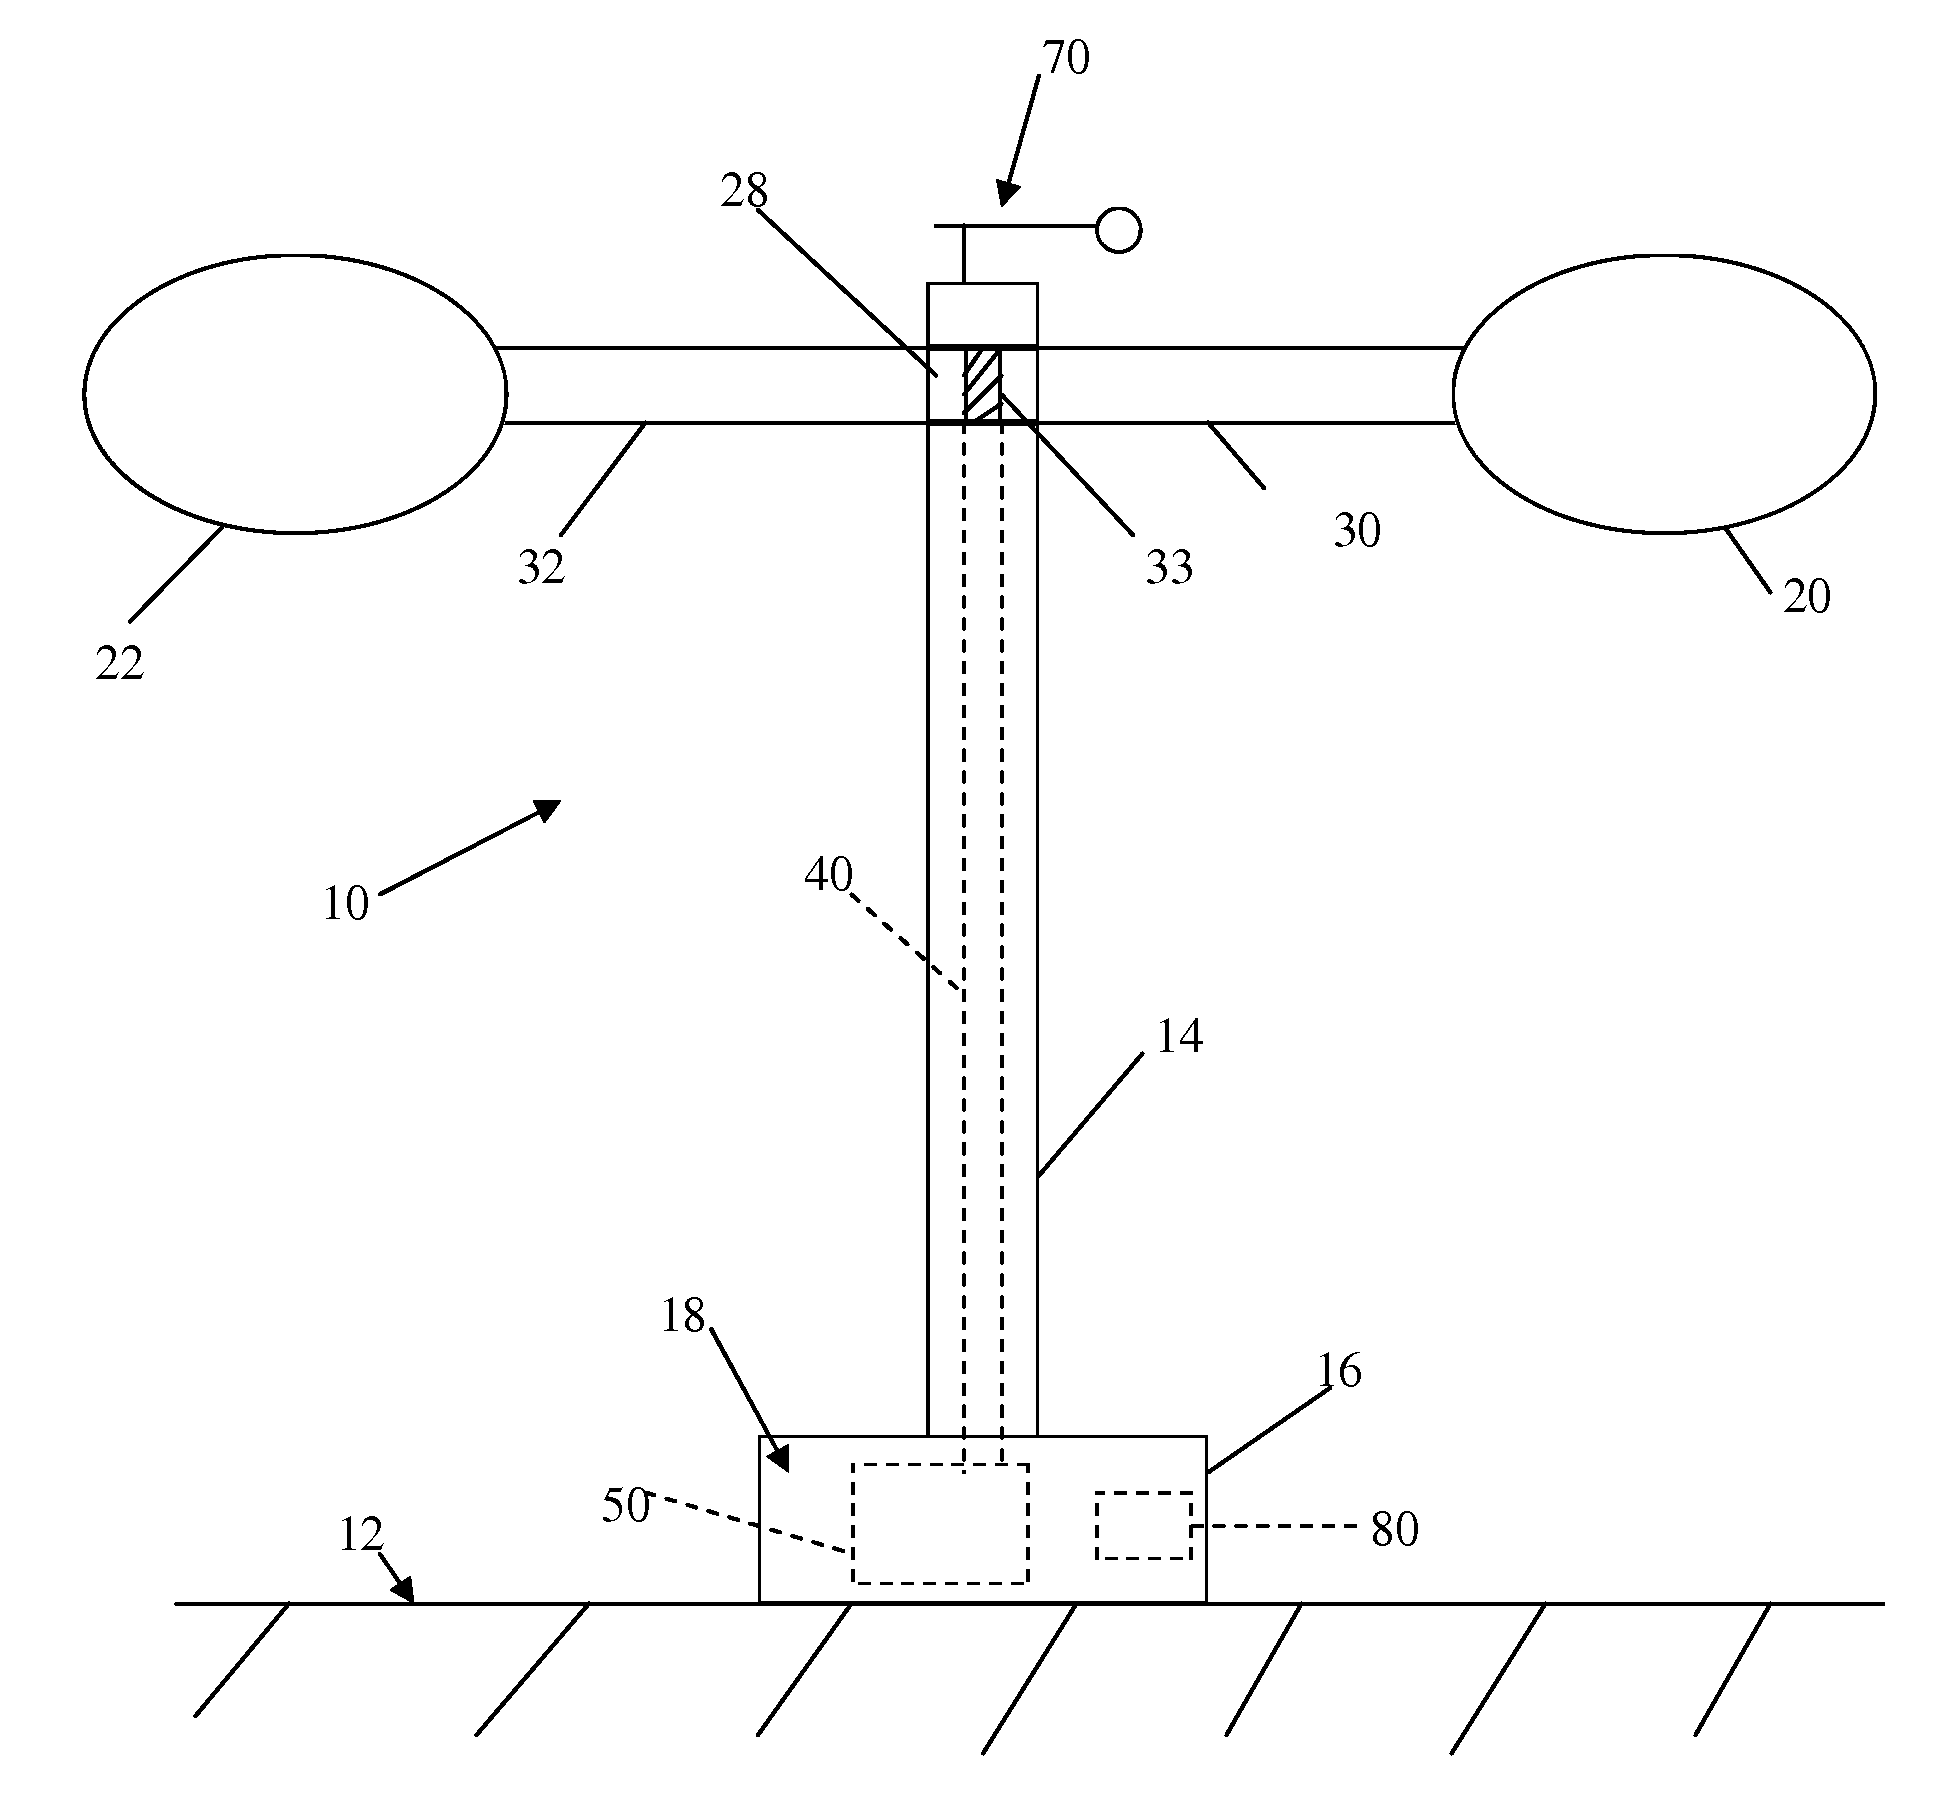 Adjustable wind-resistance windmill with indicia